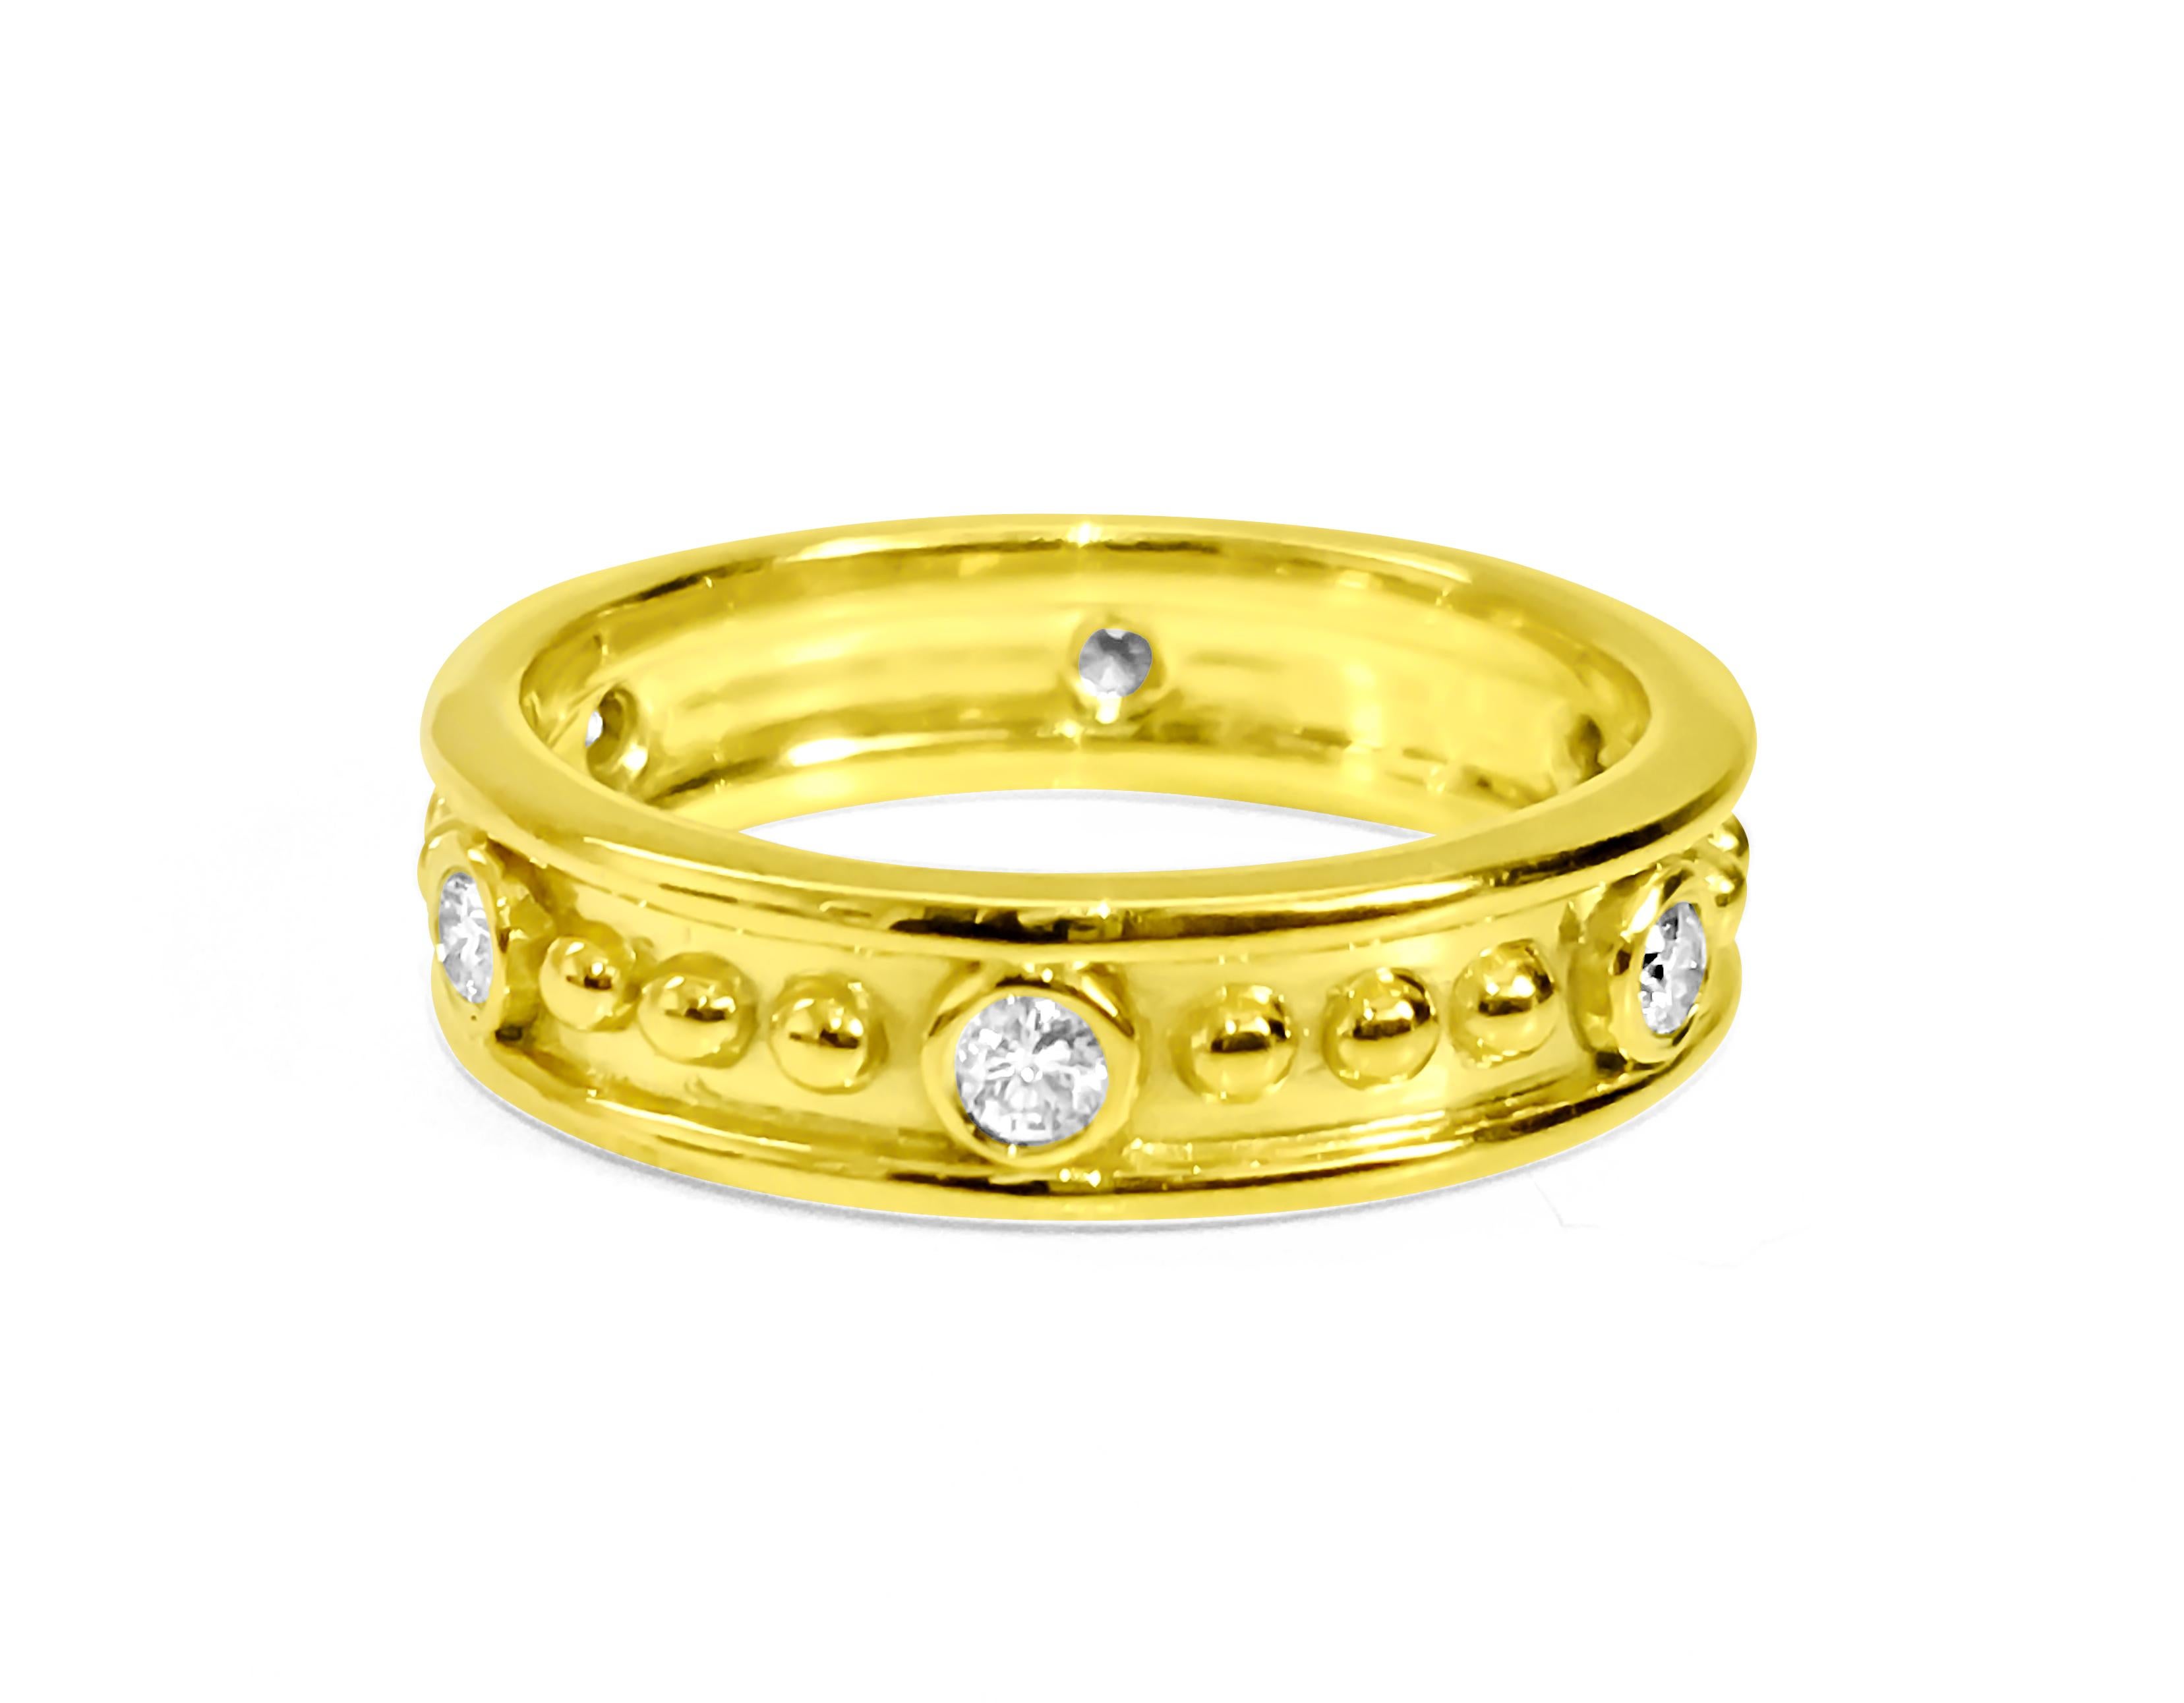 Step into timeless elegance with our exquisite 18K yellow gold ring adorned with 0.48 carats of G color, VS clarity diamonds. Meticulously crafted, this vintage-inspired boutique piece is an ideal choice for weddings and engagements, offering both